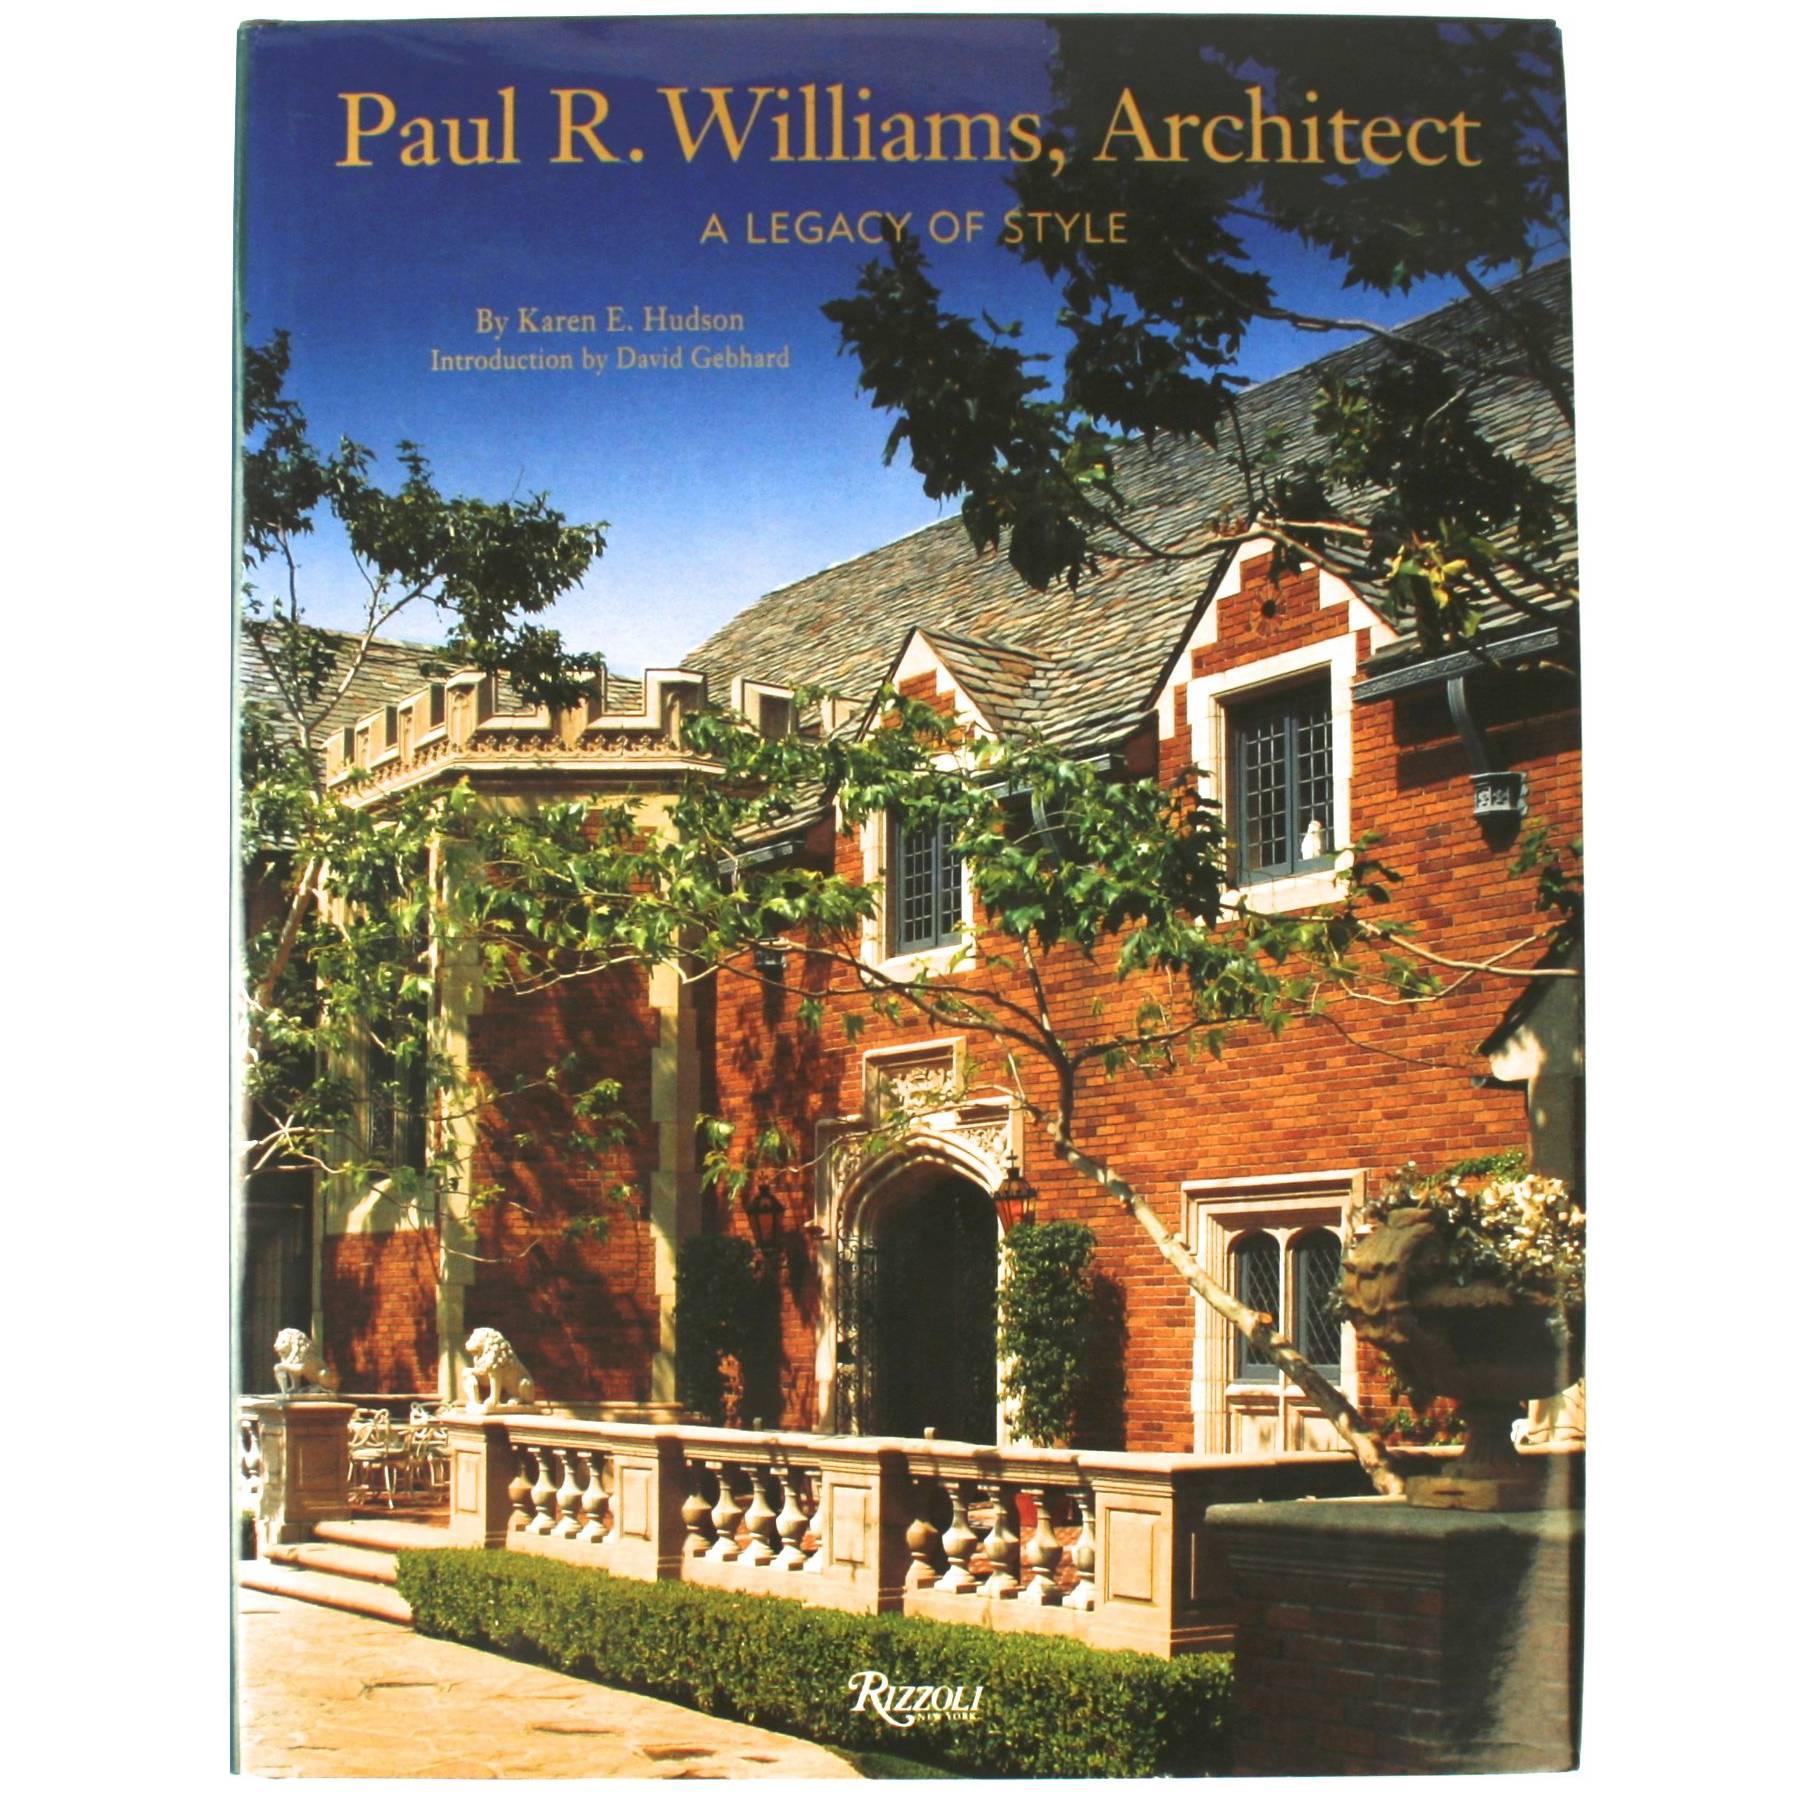 "Paul R Williams, Architect" First Edition Book